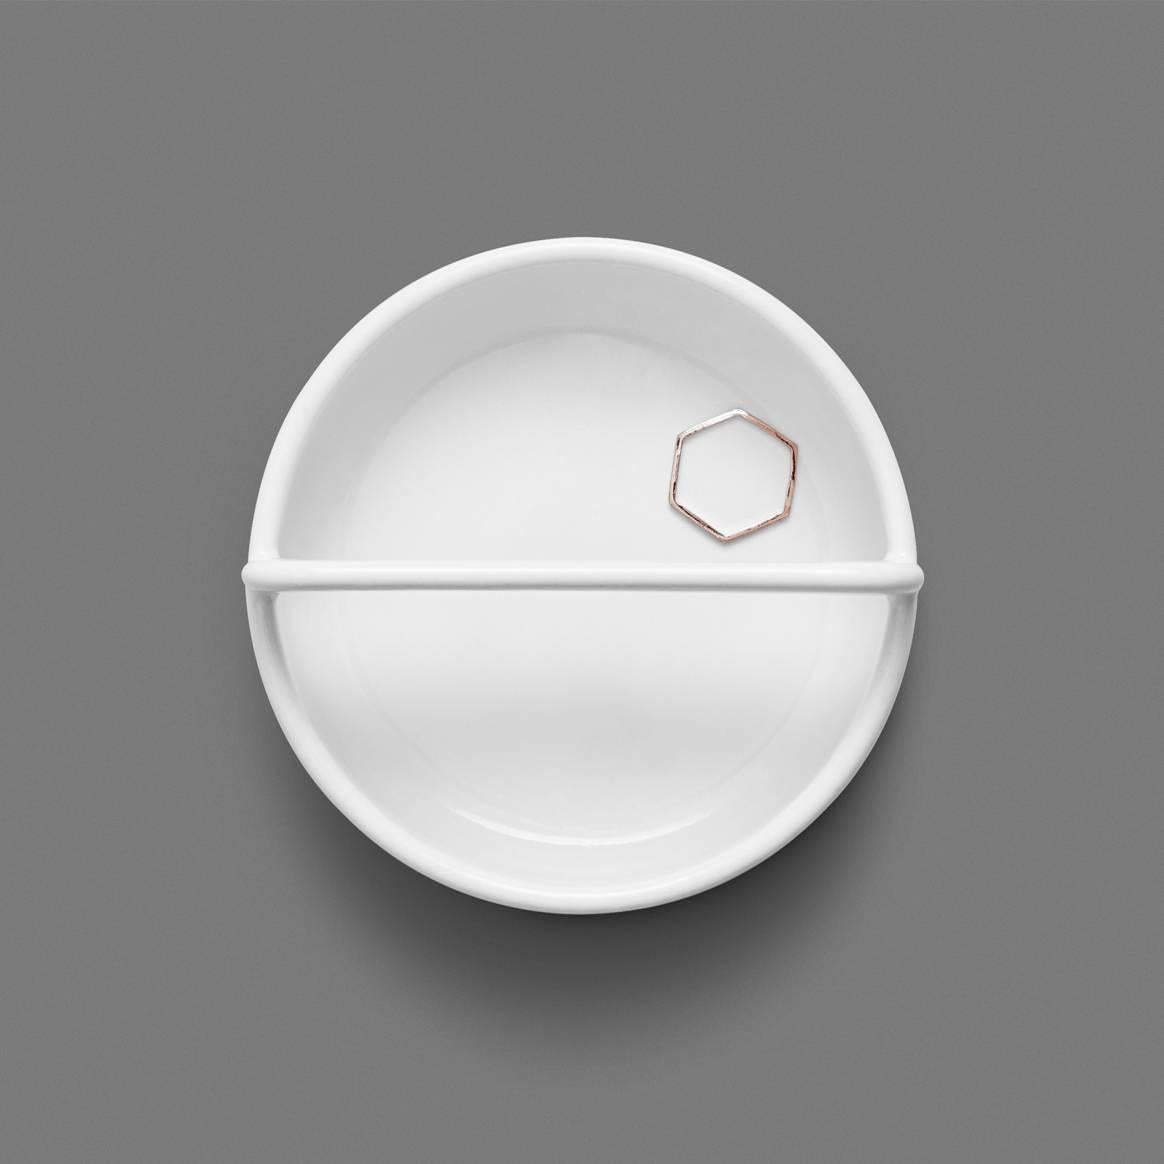 Other Trestle Bowl / Vessel Set in Contemporary 3D Printed Gloss White Porcelain For Sale